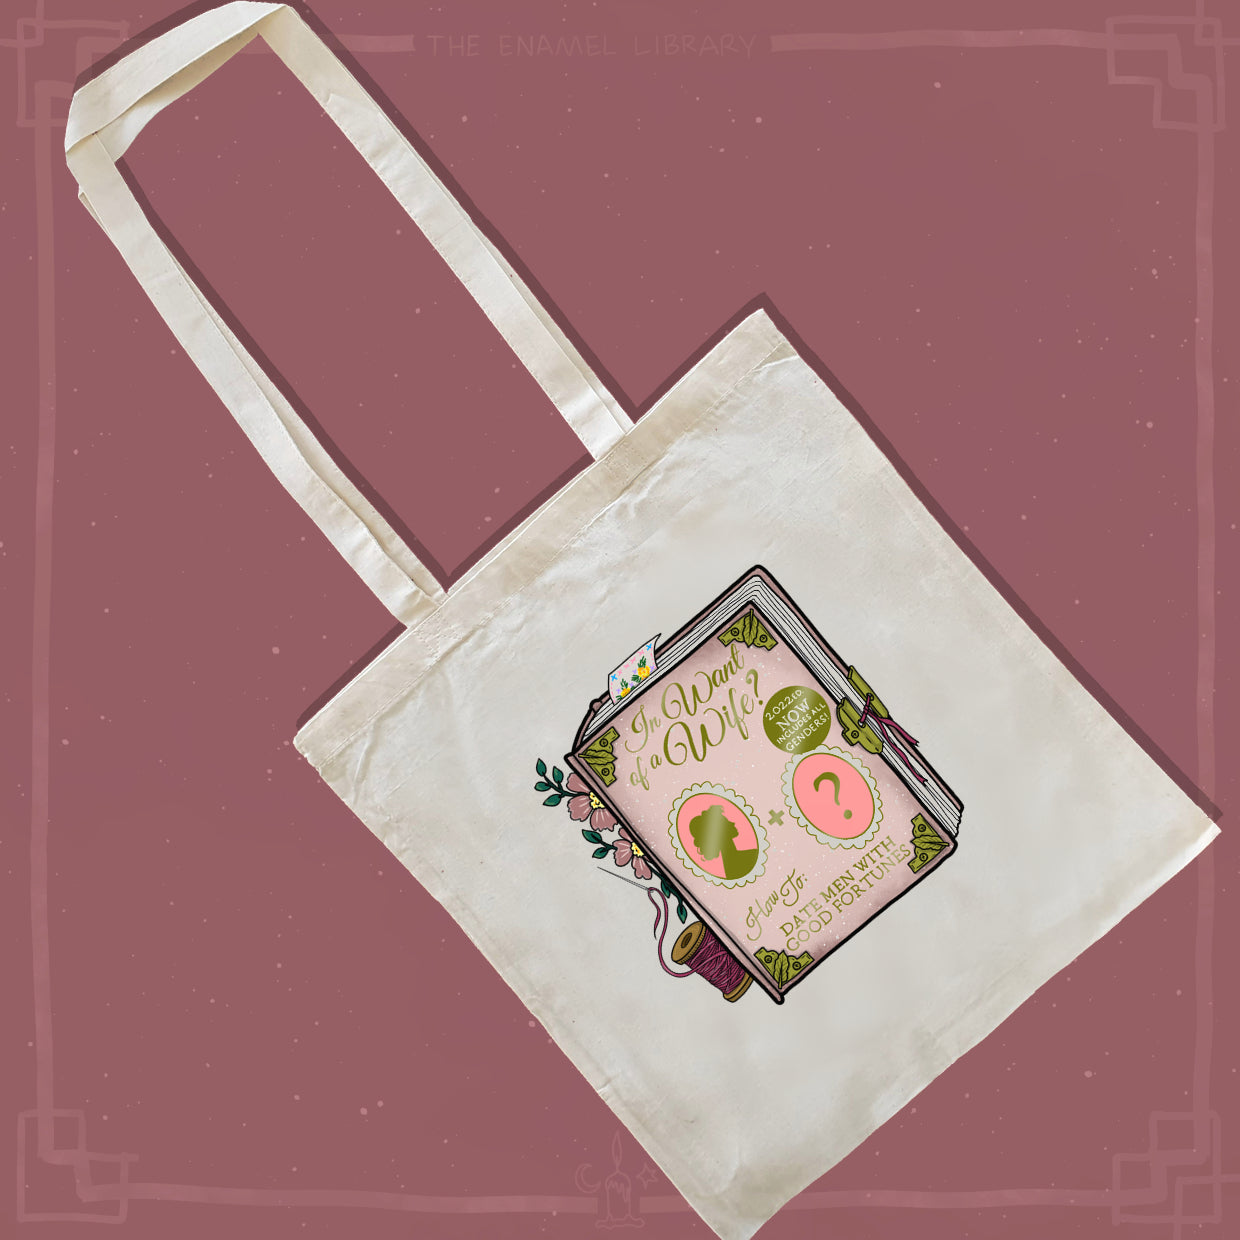 In Want of a Wife? Tote Bag